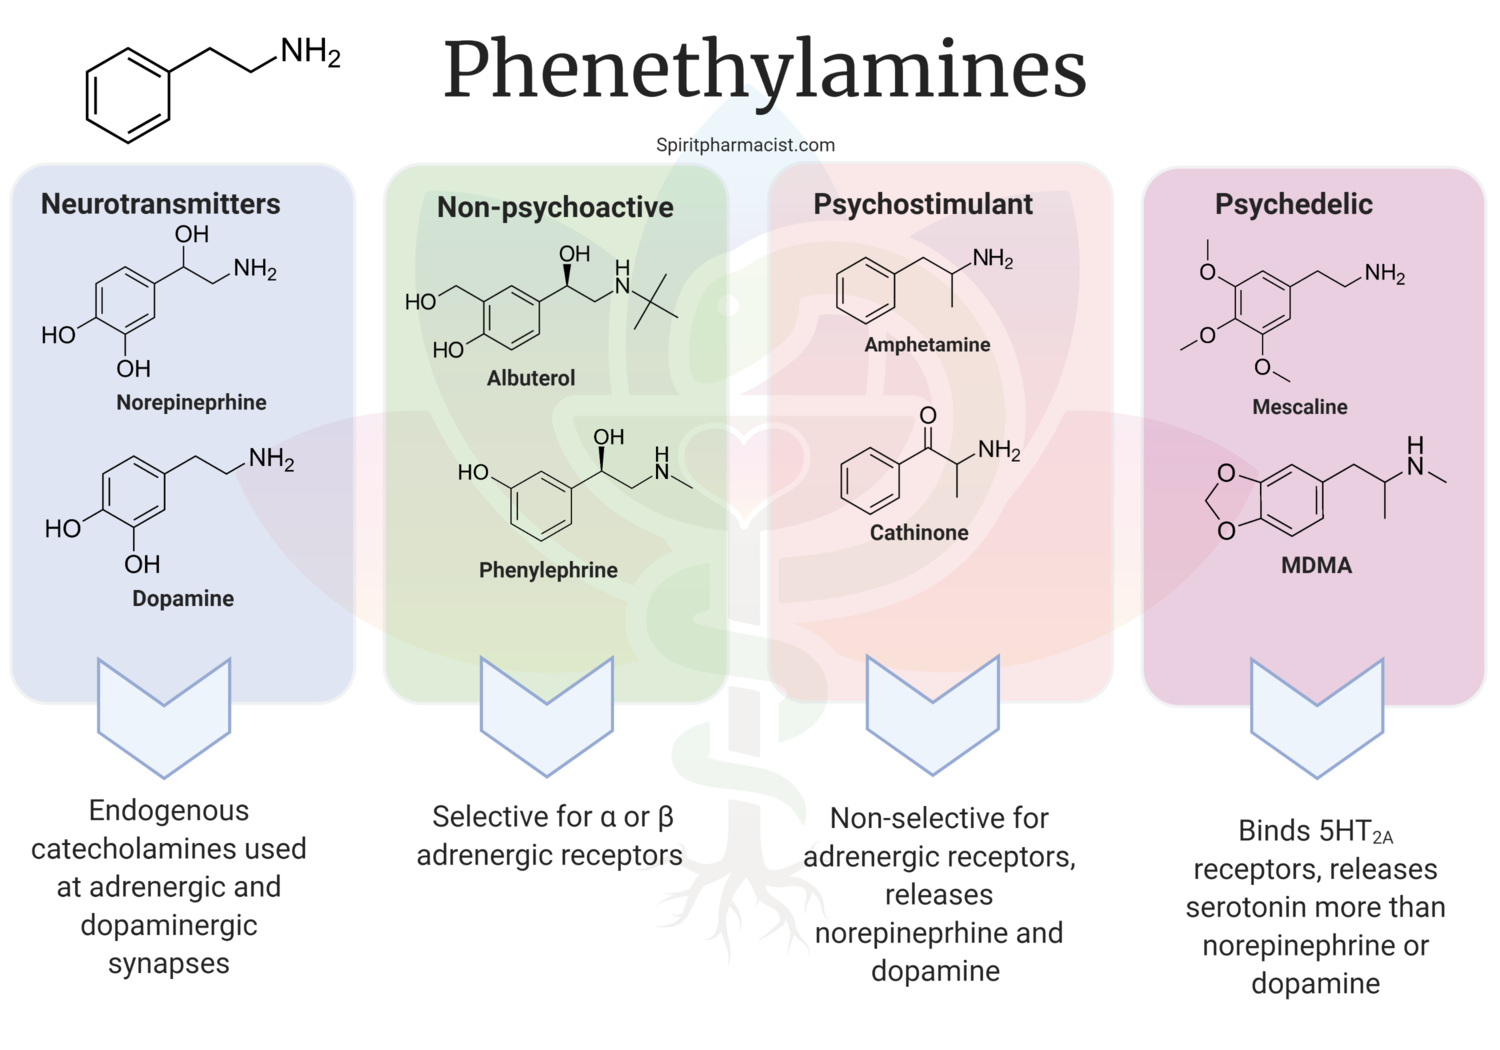 Image Source: Foundation to Psychedelic Pharmacology